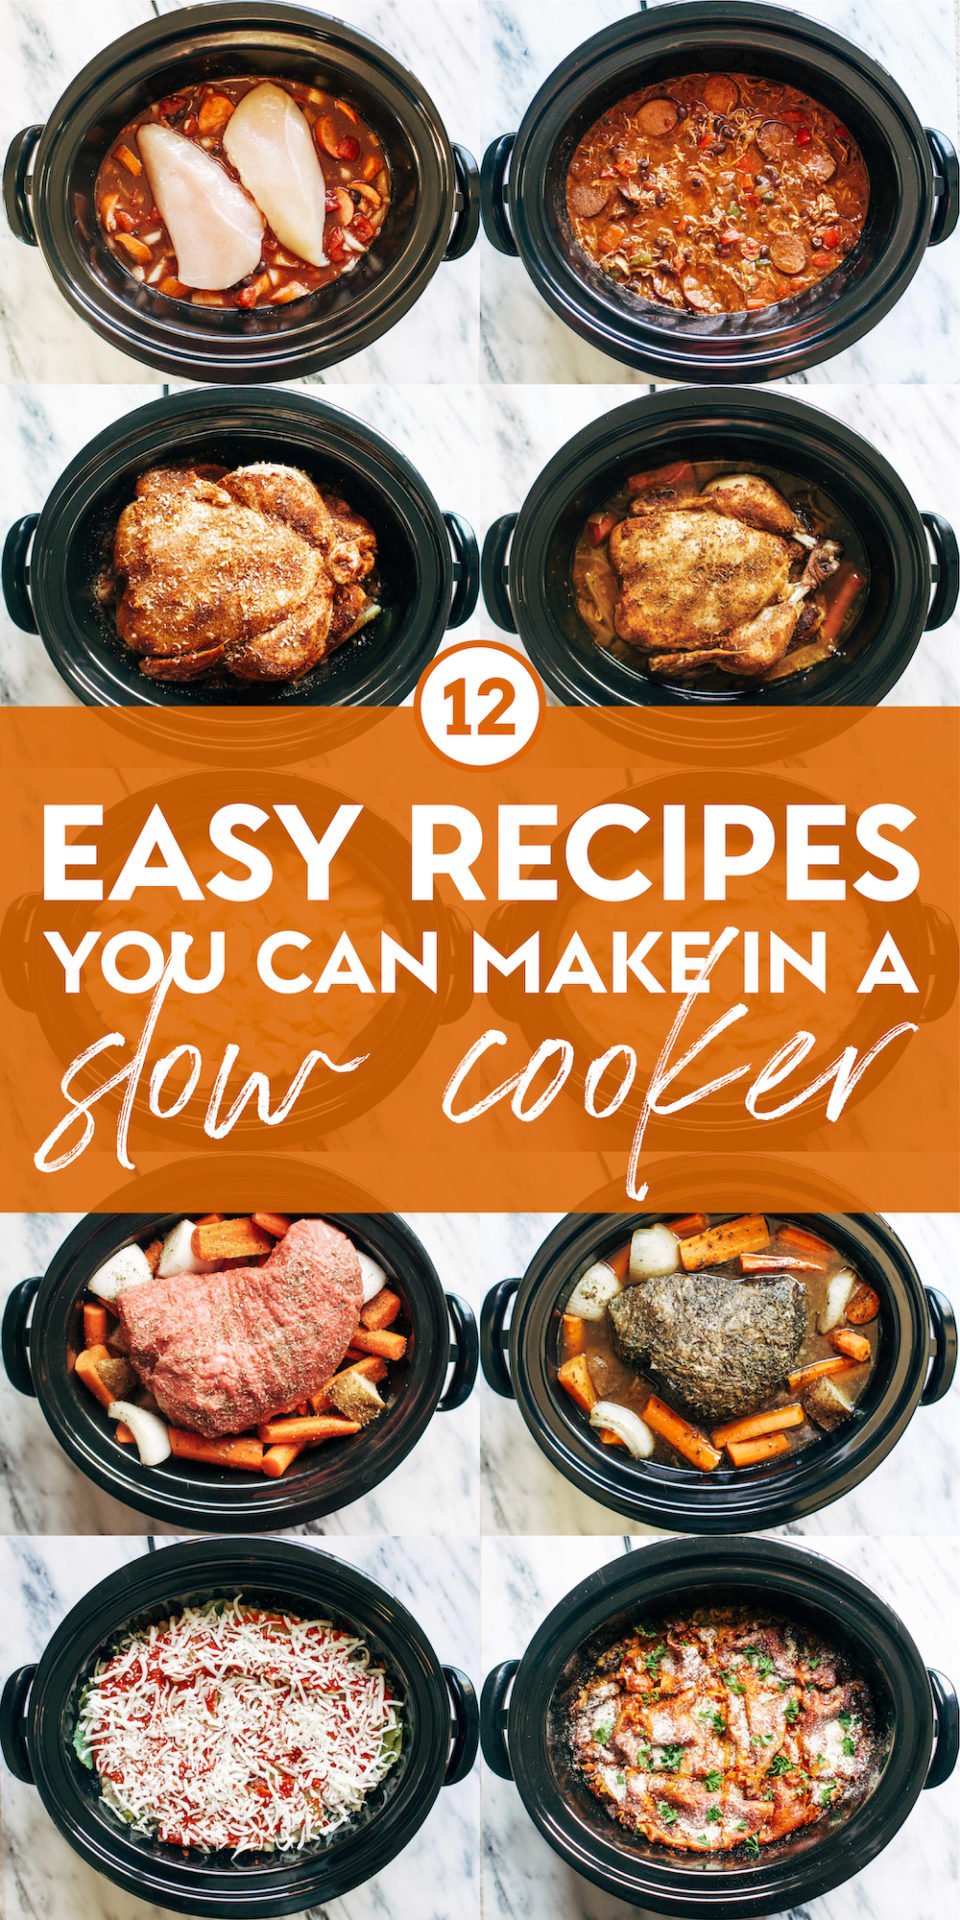 9 Mini Slow Cookers Every Chef Needs - Drizzle Me Skinny!